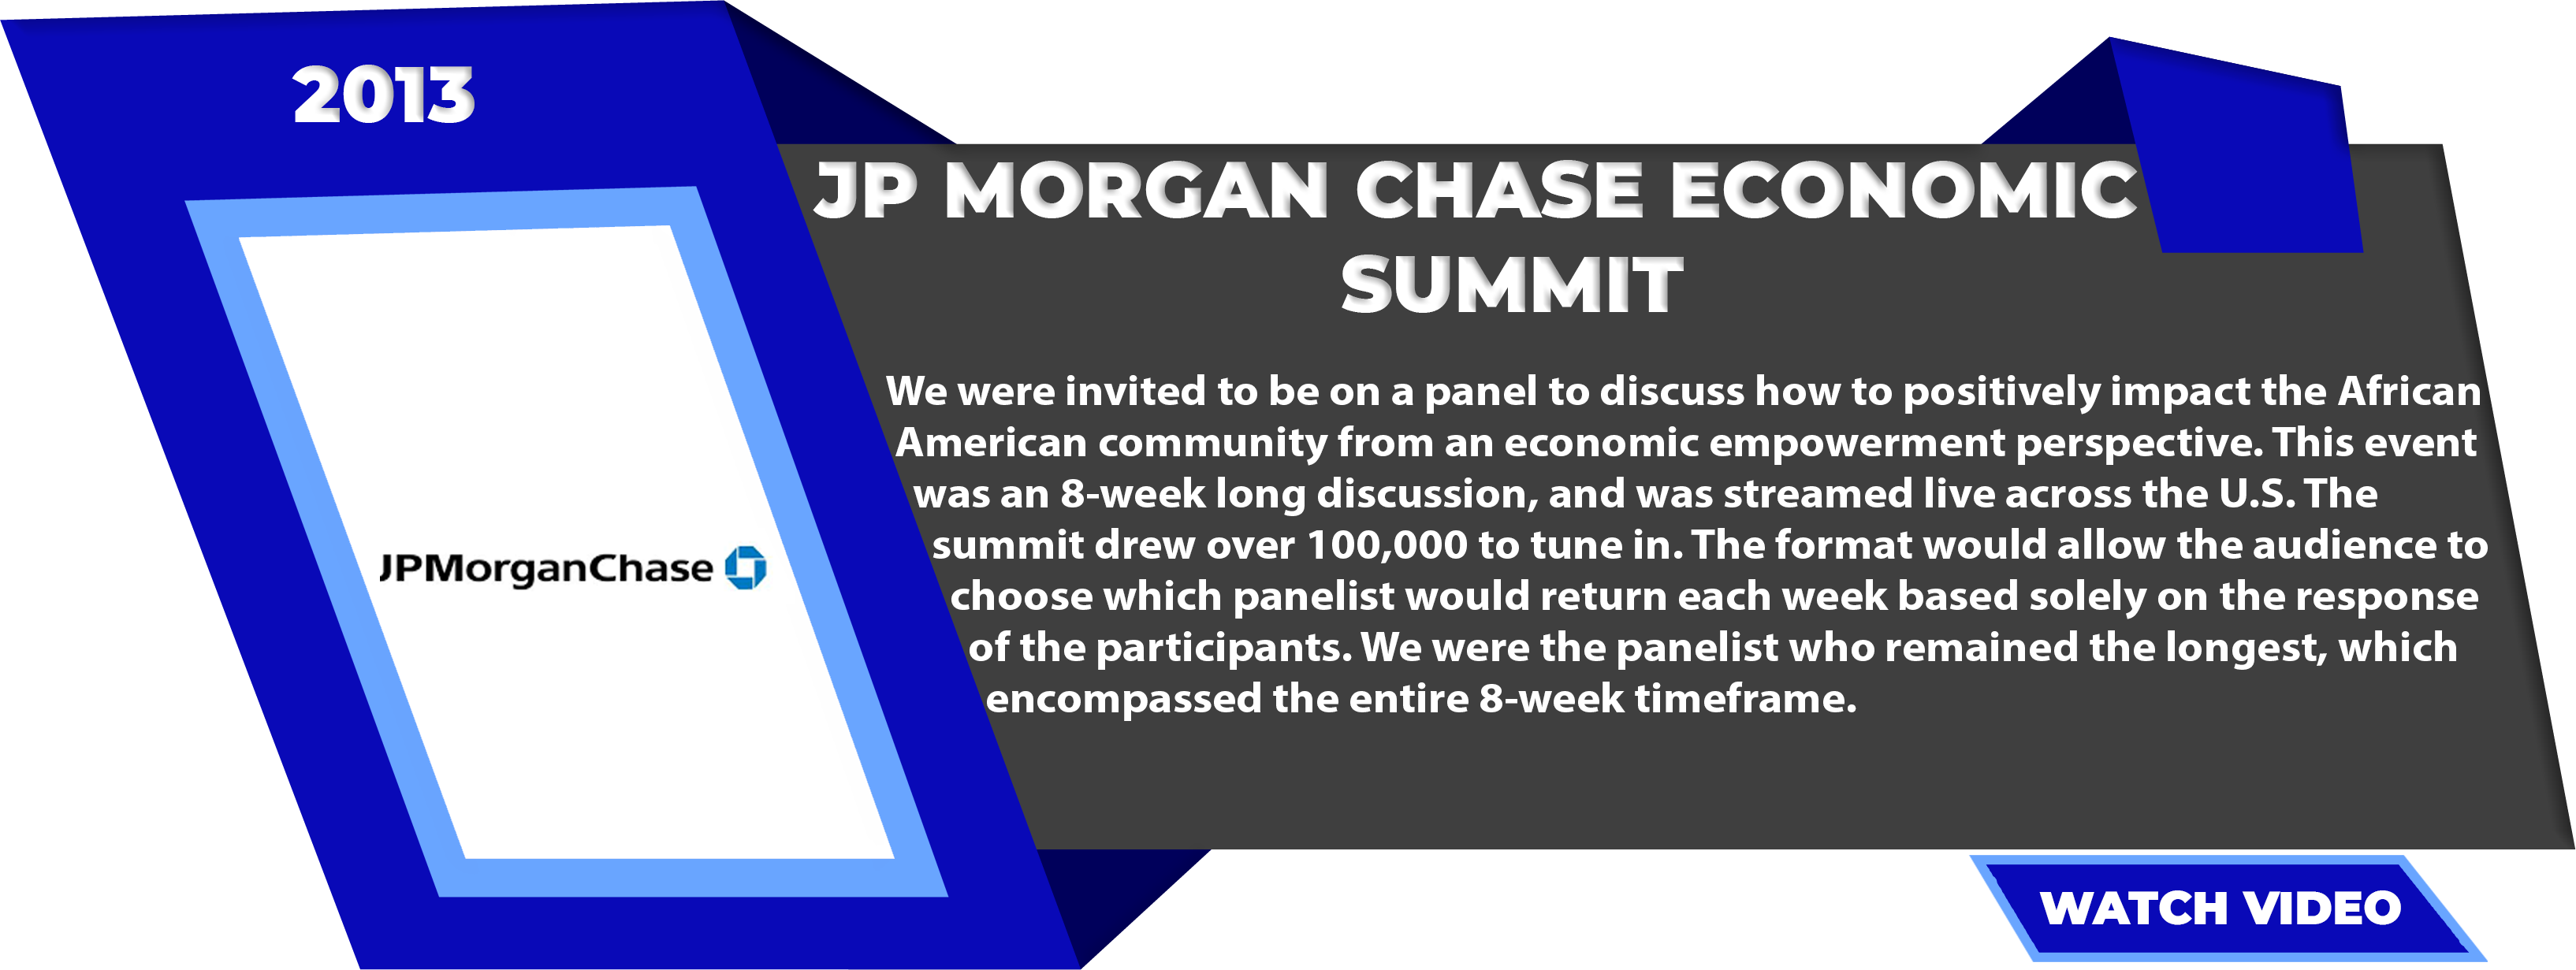 JP Morgan Chase Economic Summit 2013-Recovered